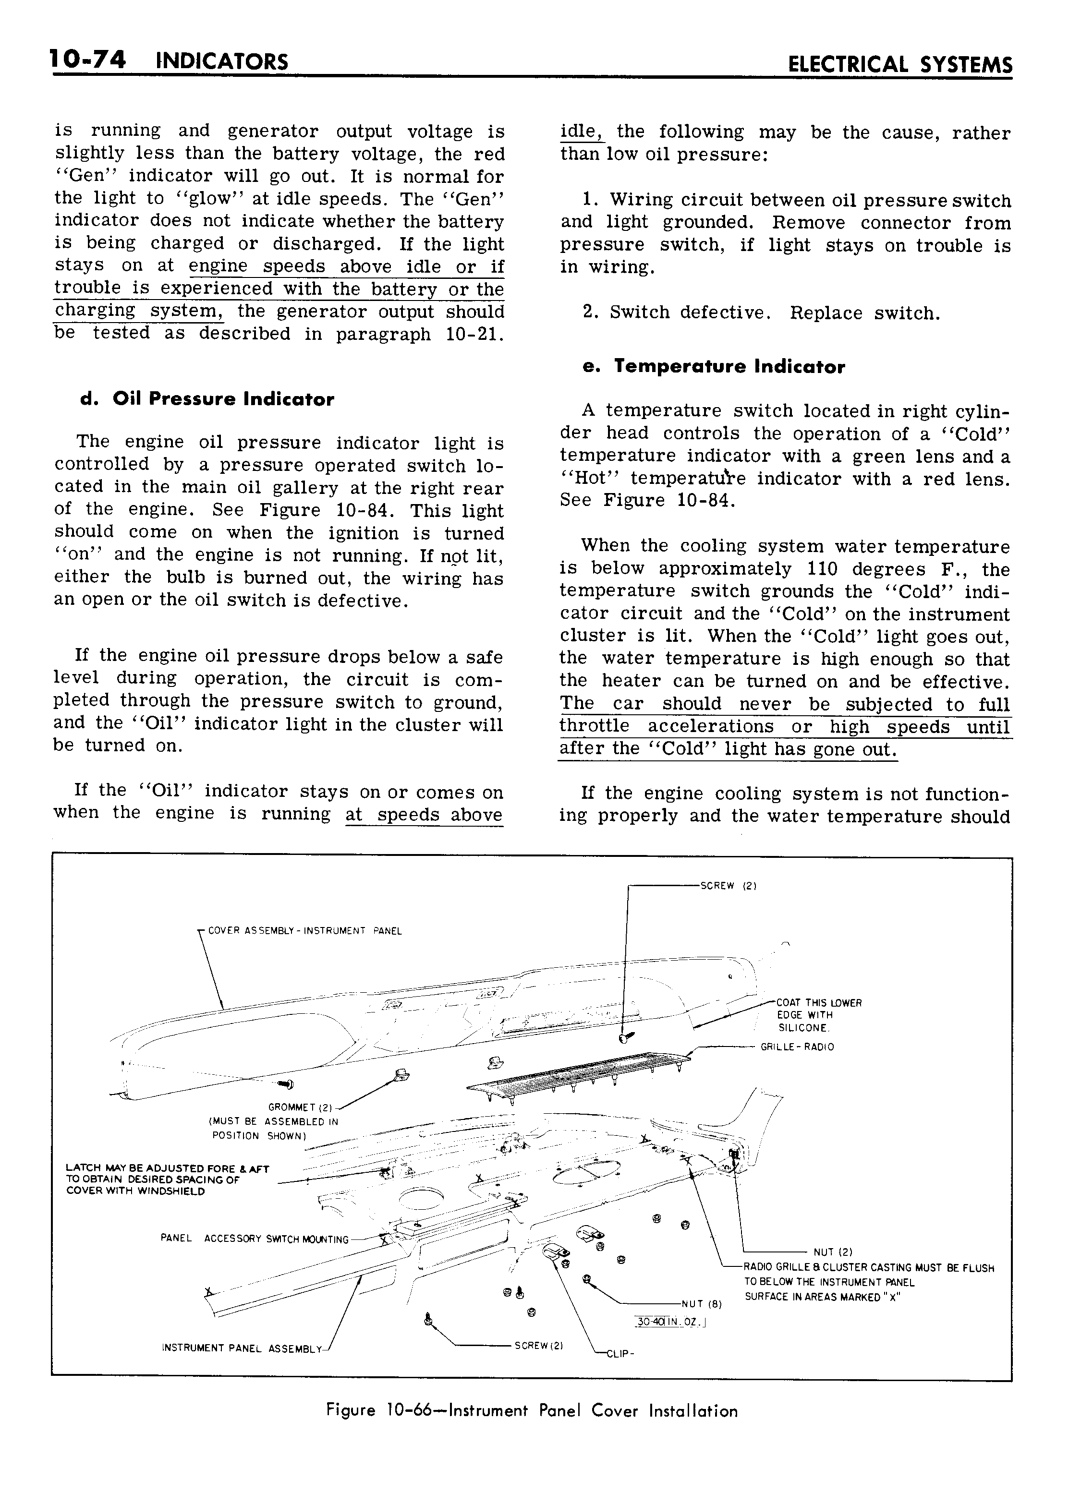 n_10 1961 Buick Shop Manual - Electrical Systems-074-074.jpg